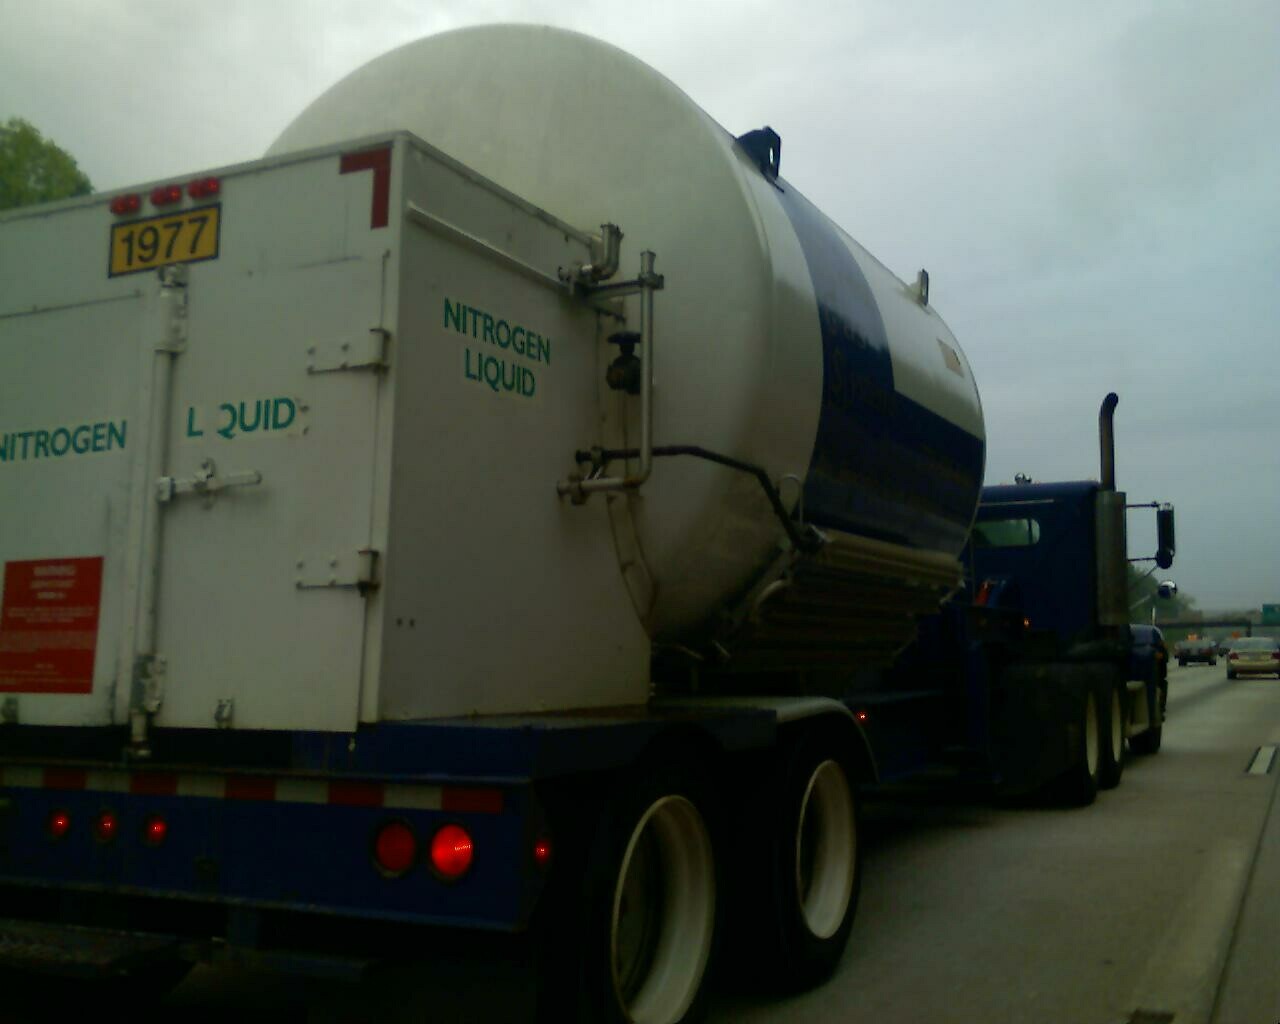 the truck is carrying a large tanker